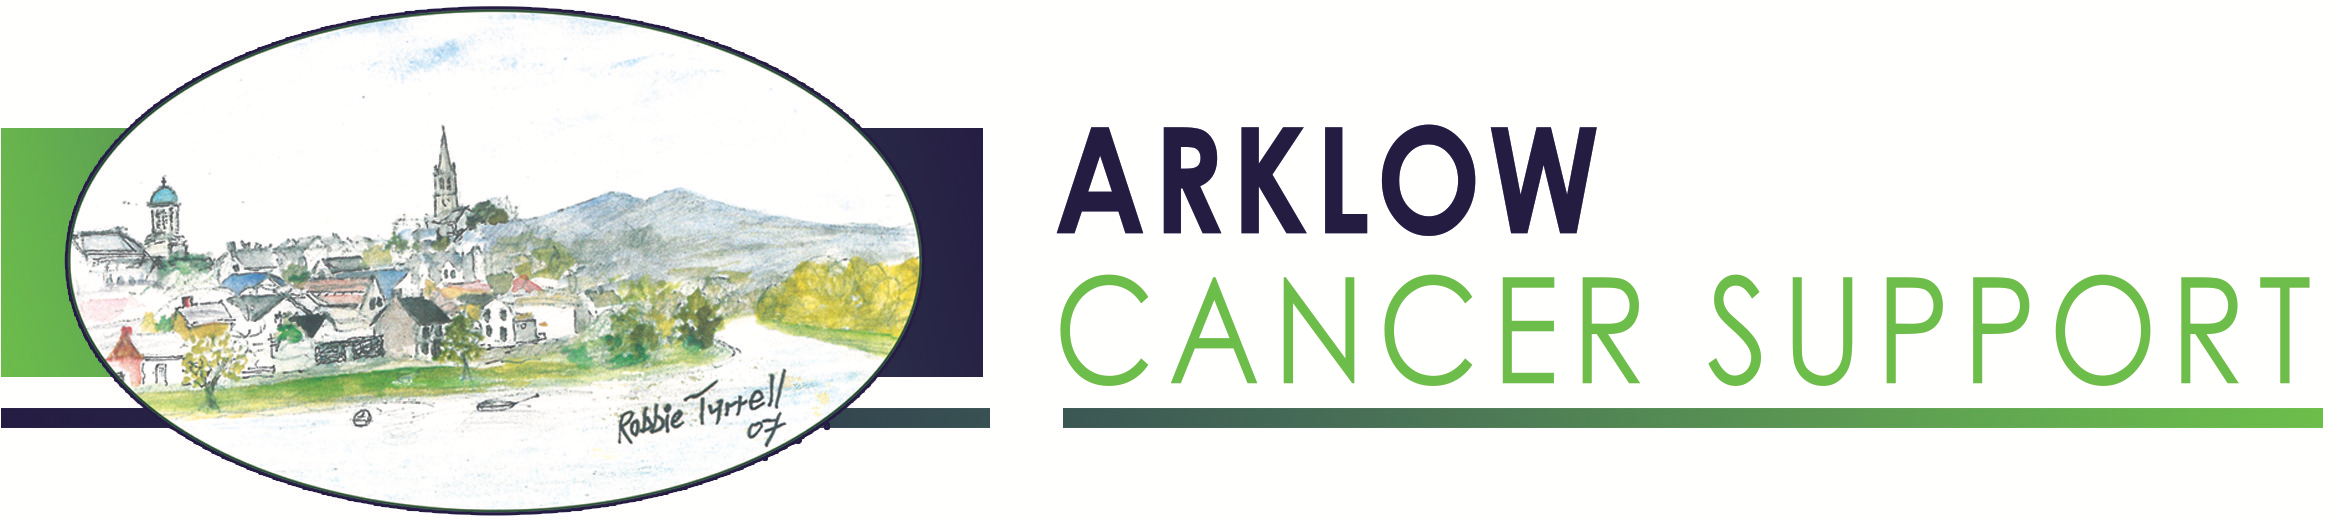 Arklow Cancer Support